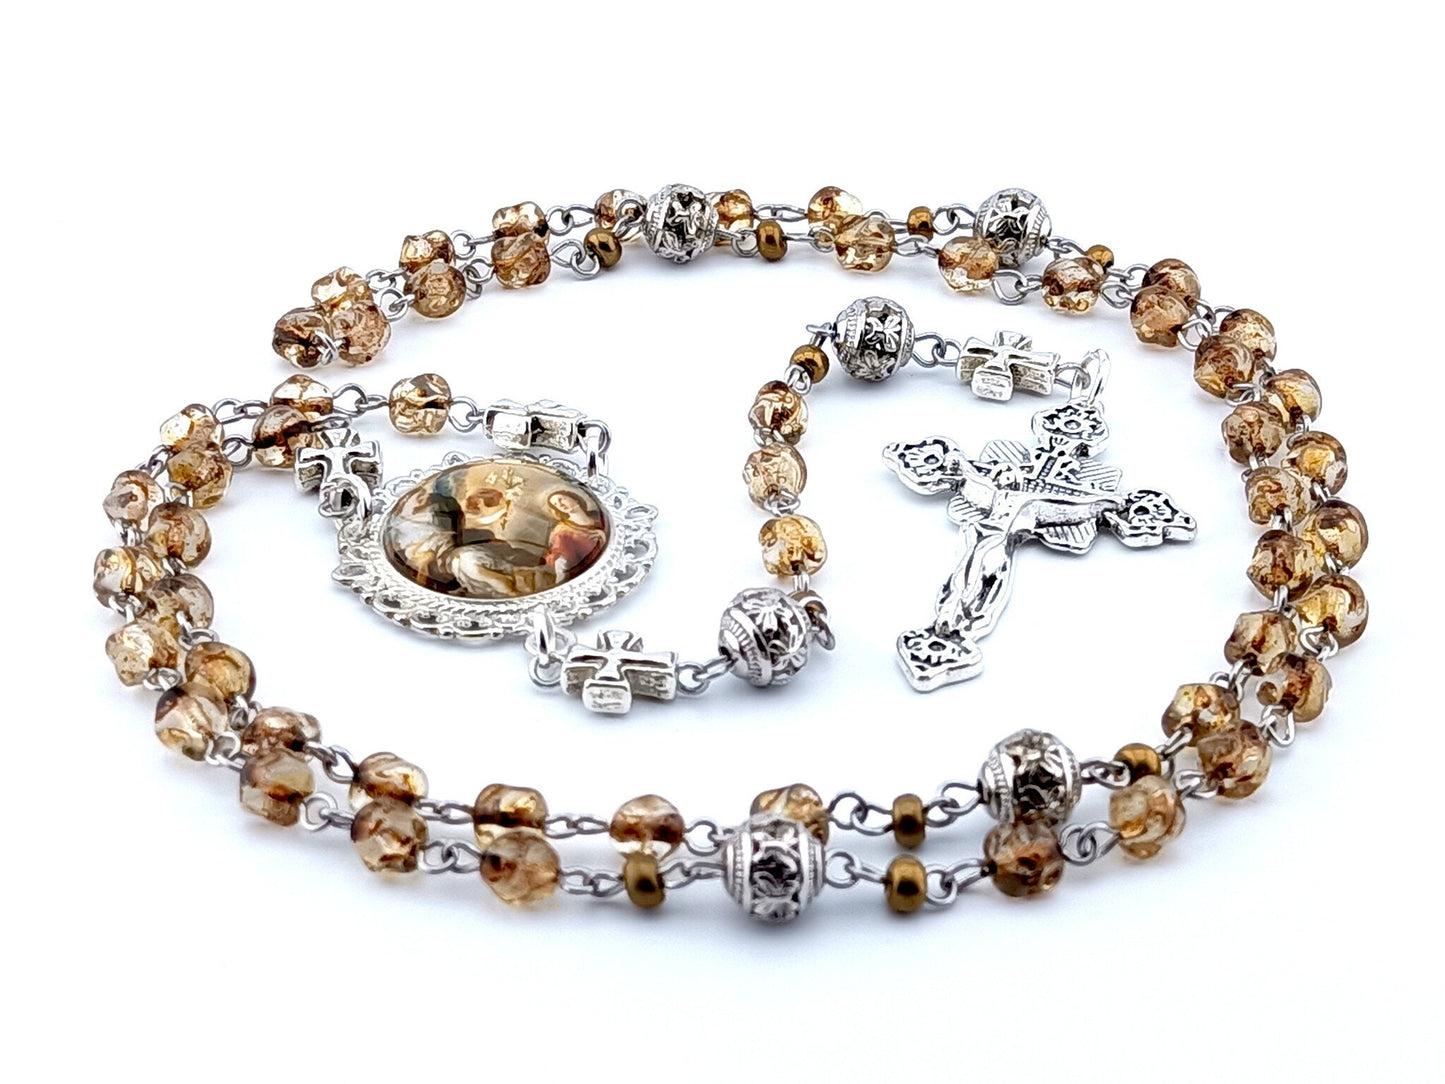 The Annunciation to Mary unique rosary beads with brown nugget glass beads, silver crucifix, picture centre medal, pater beads and linking cross beads.